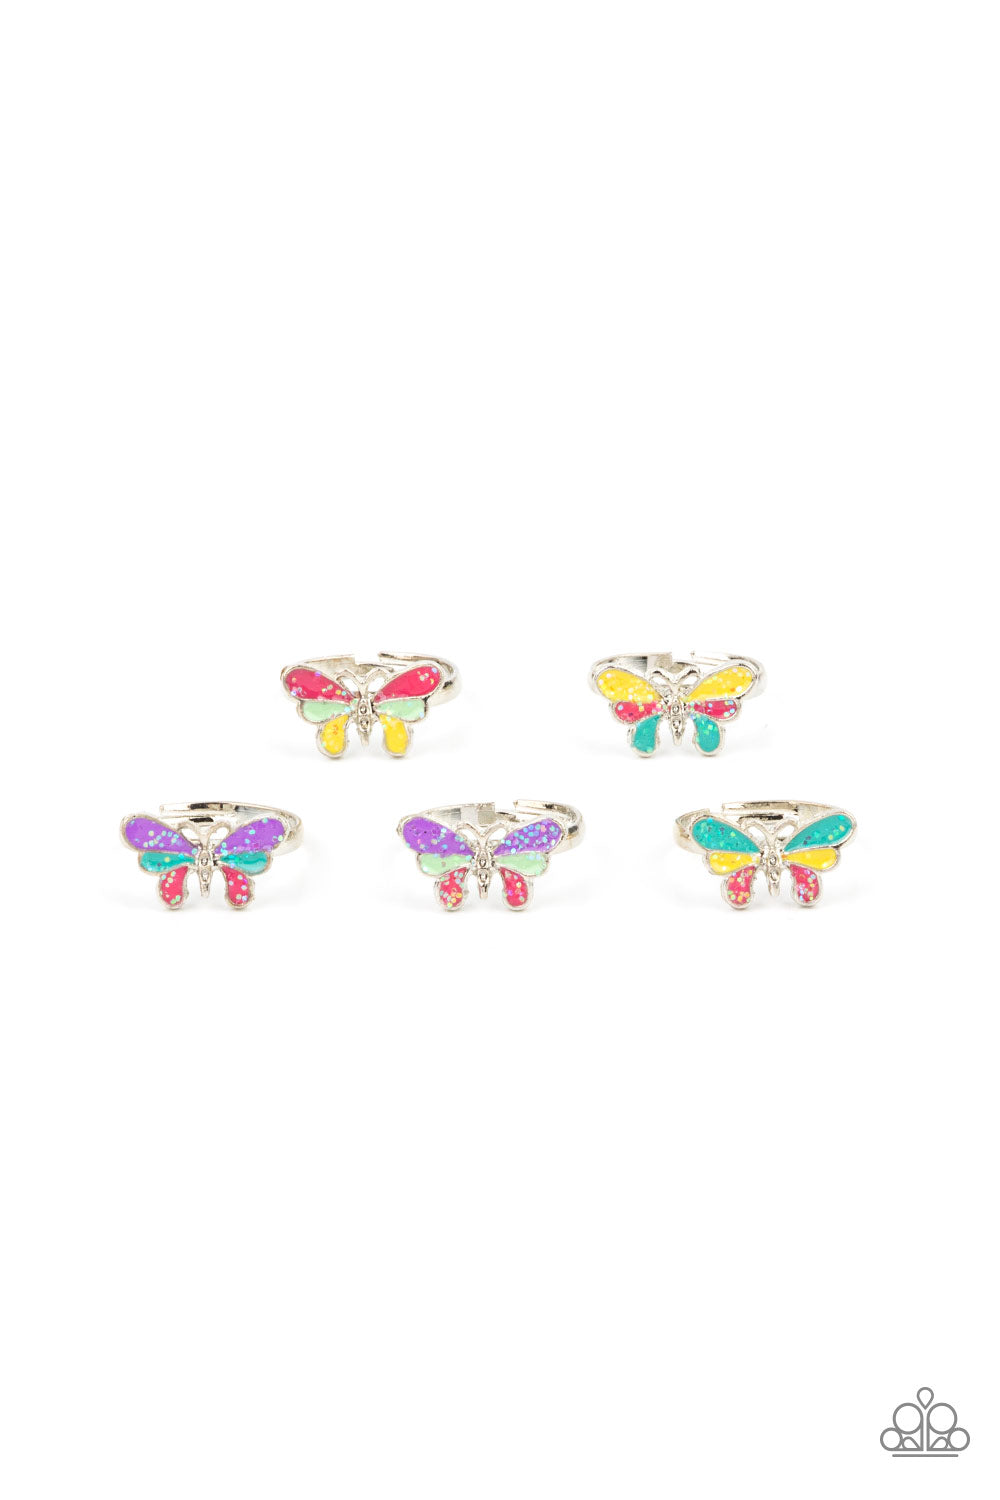 Starlet Shimmer Kids Jewelry Multi-Color Butterfly Rings Paparazzi - 5 Pack